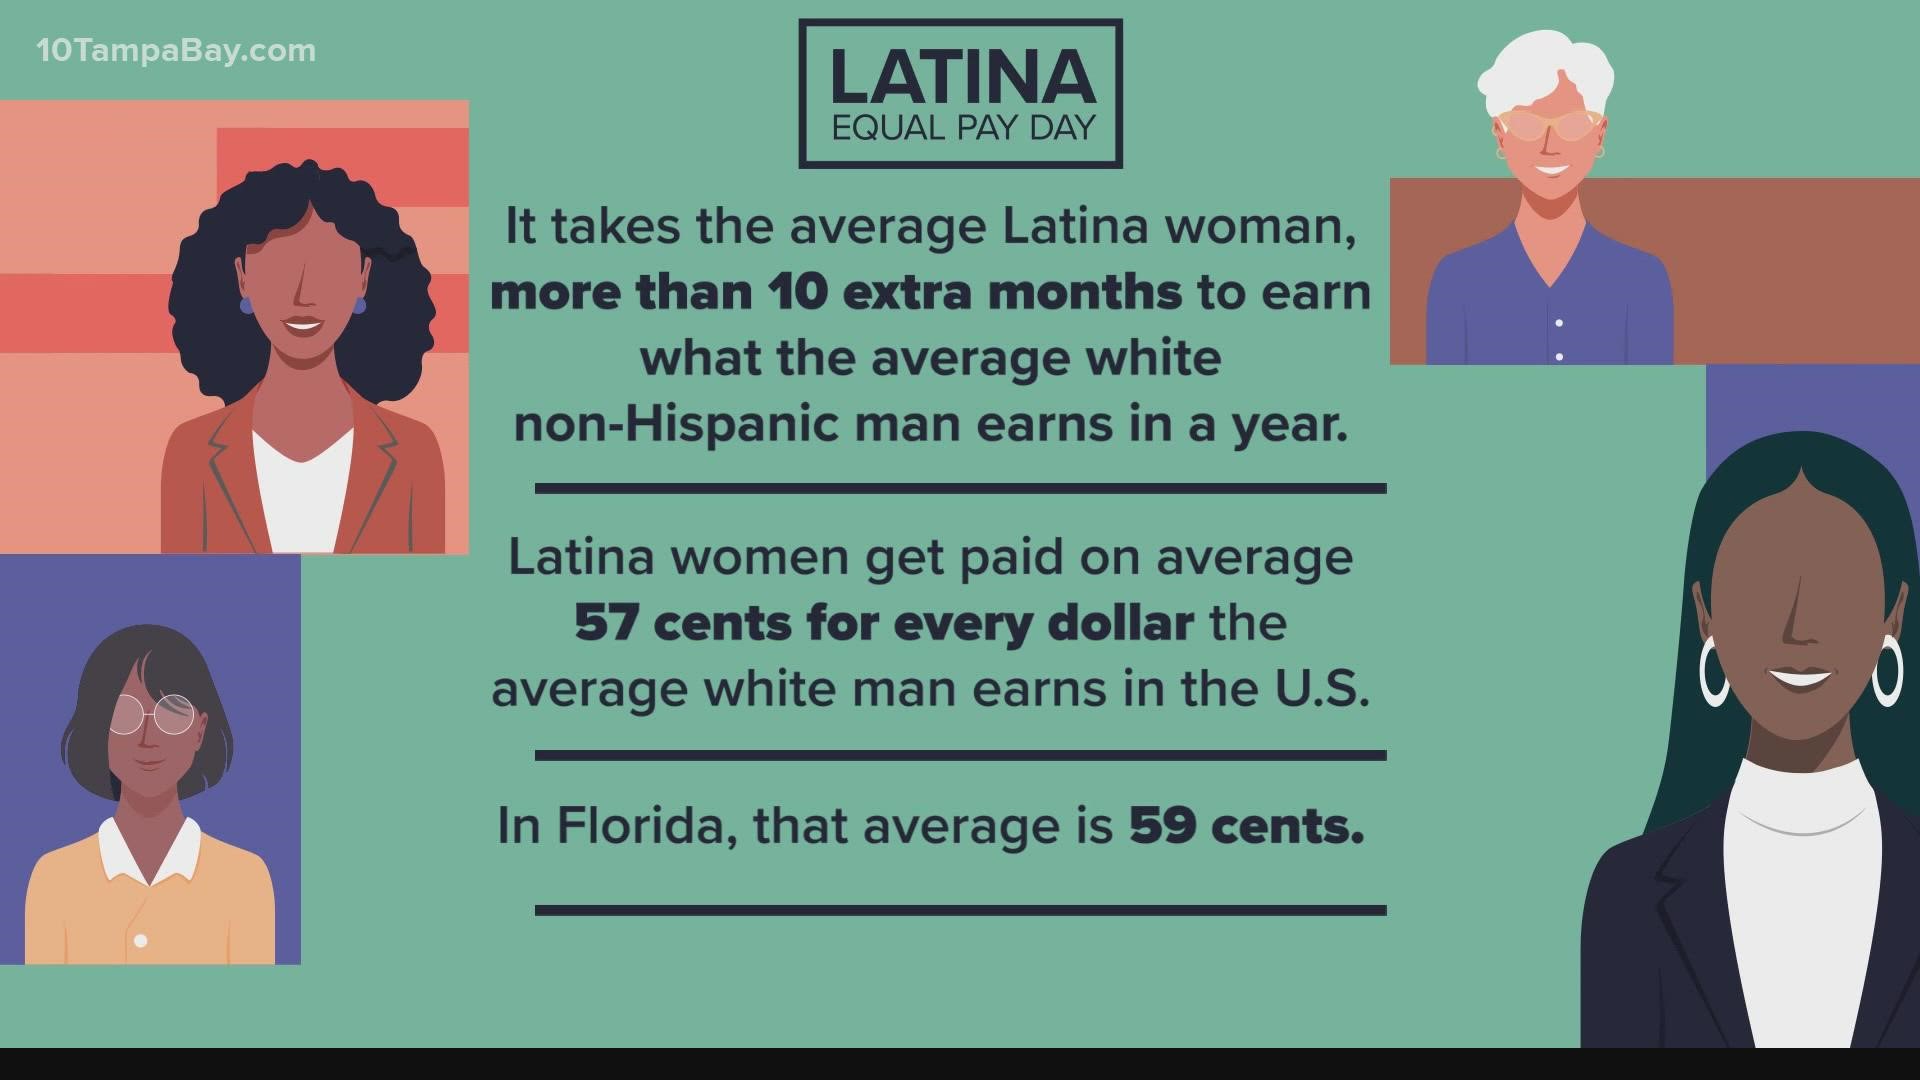 Latina Equal Pay Day lands on Thursday, Oct. 21, this year.